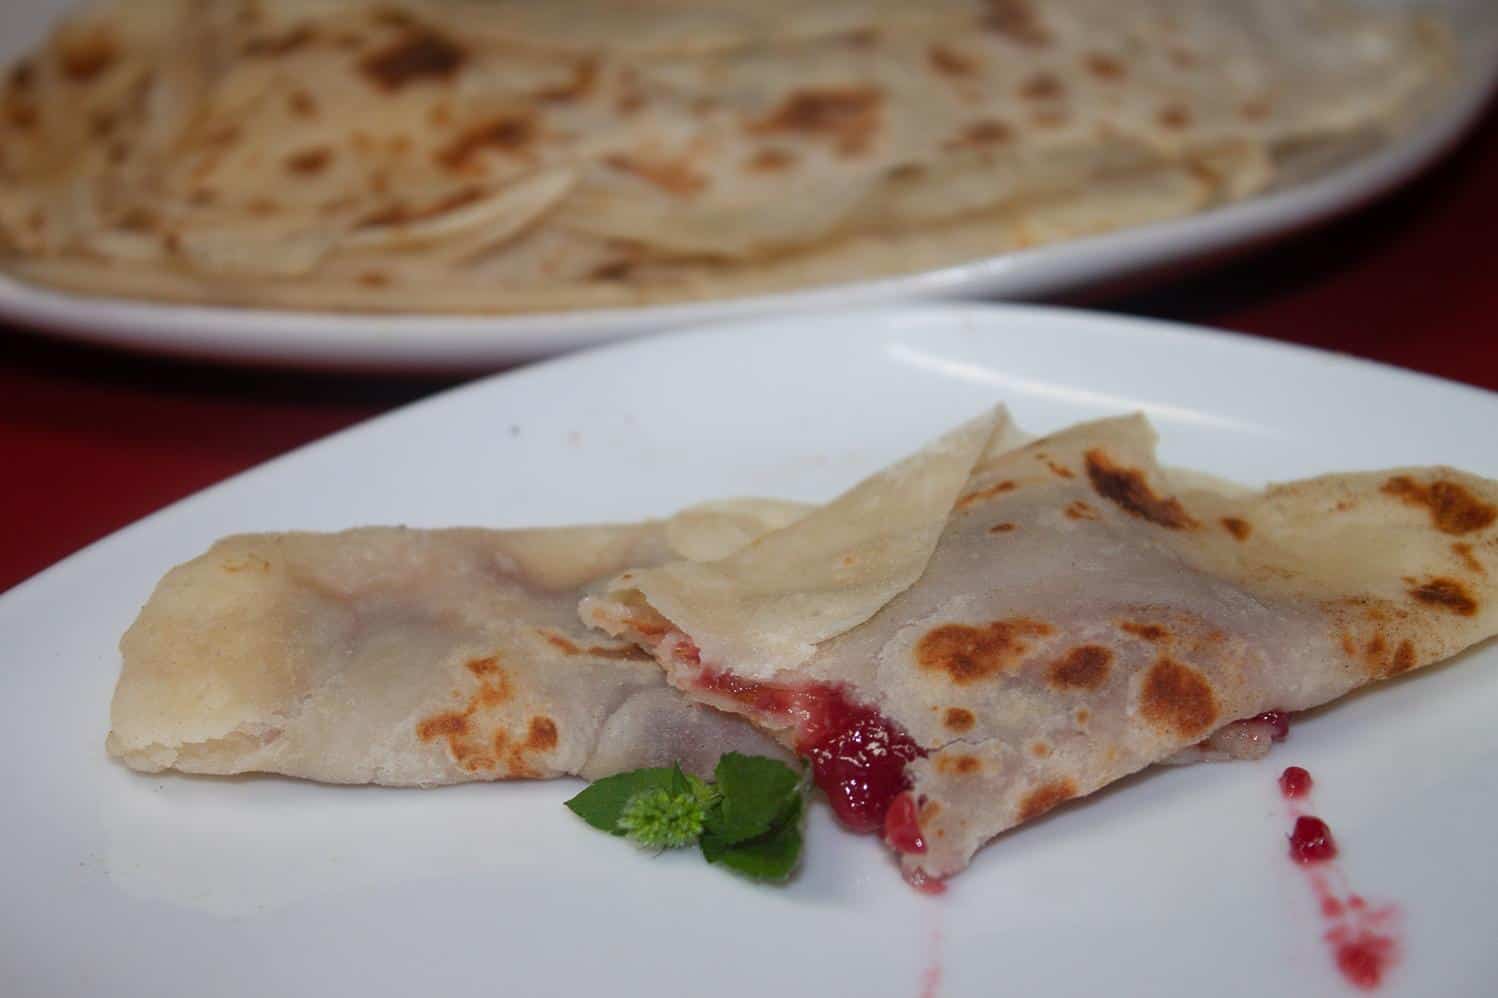  A stack of warm, fresh-off-the-griddle lefse waiting to be devoured